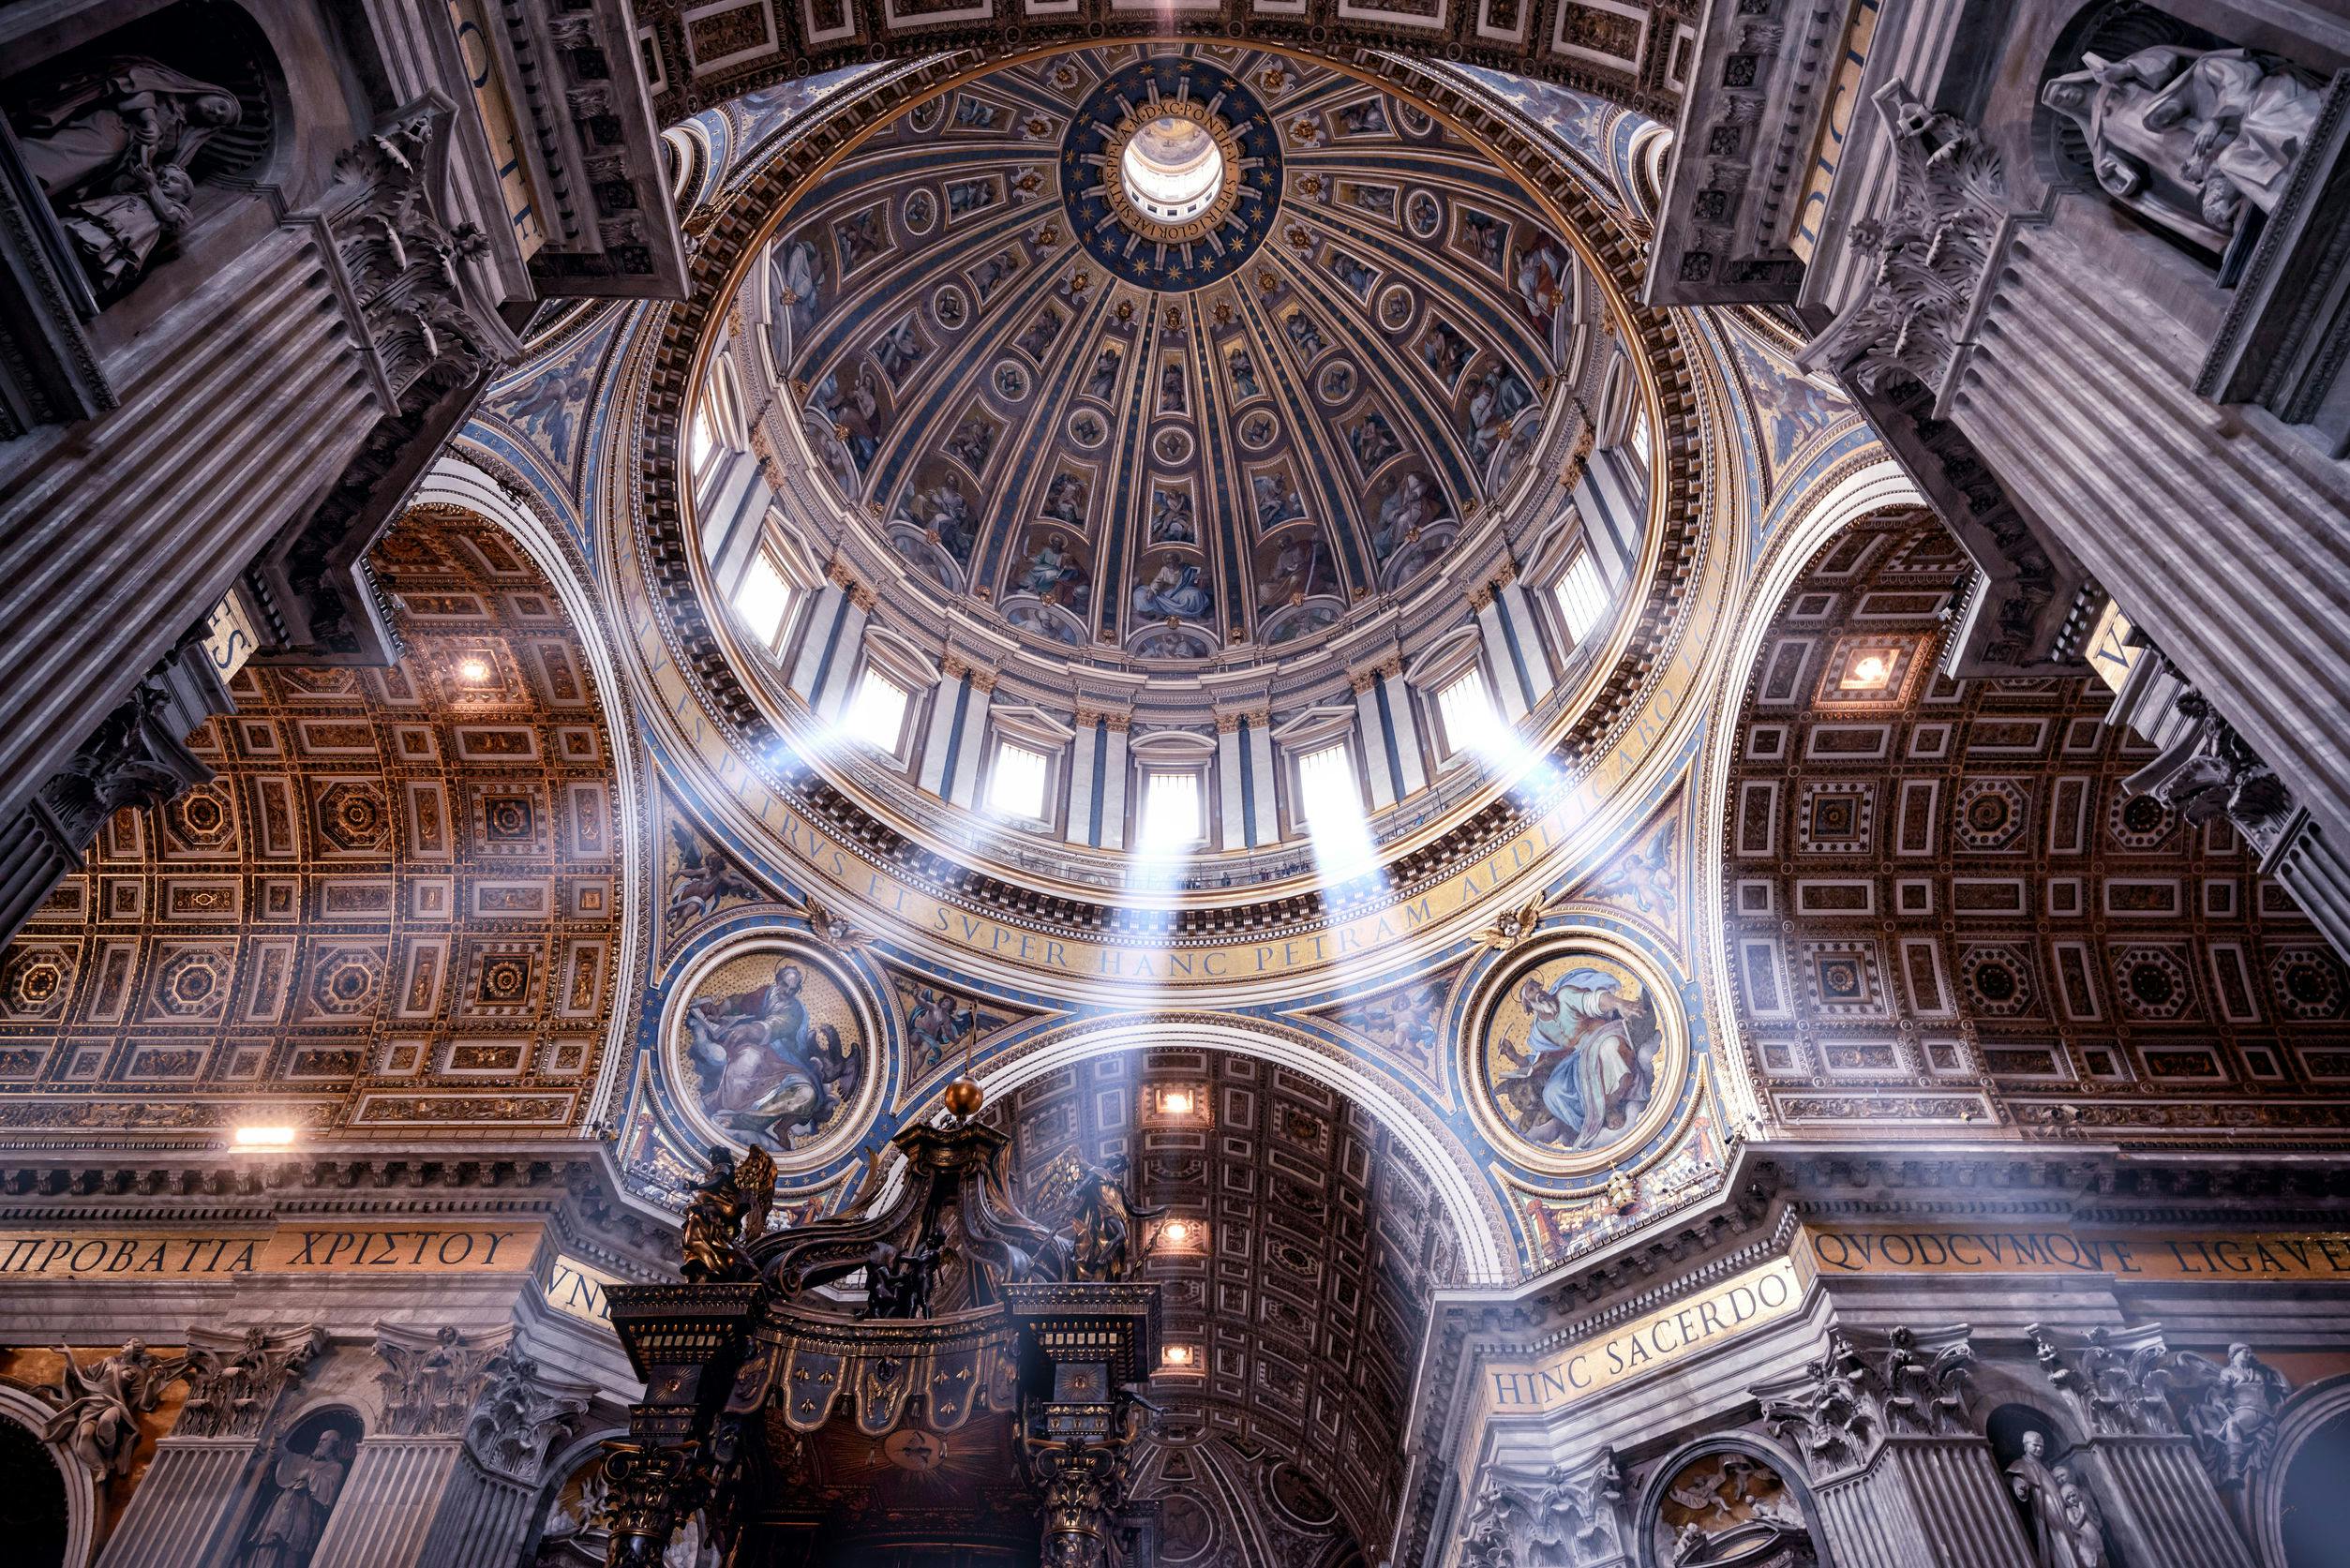 St. Peter’s Basilica self guided audio tour. Musement